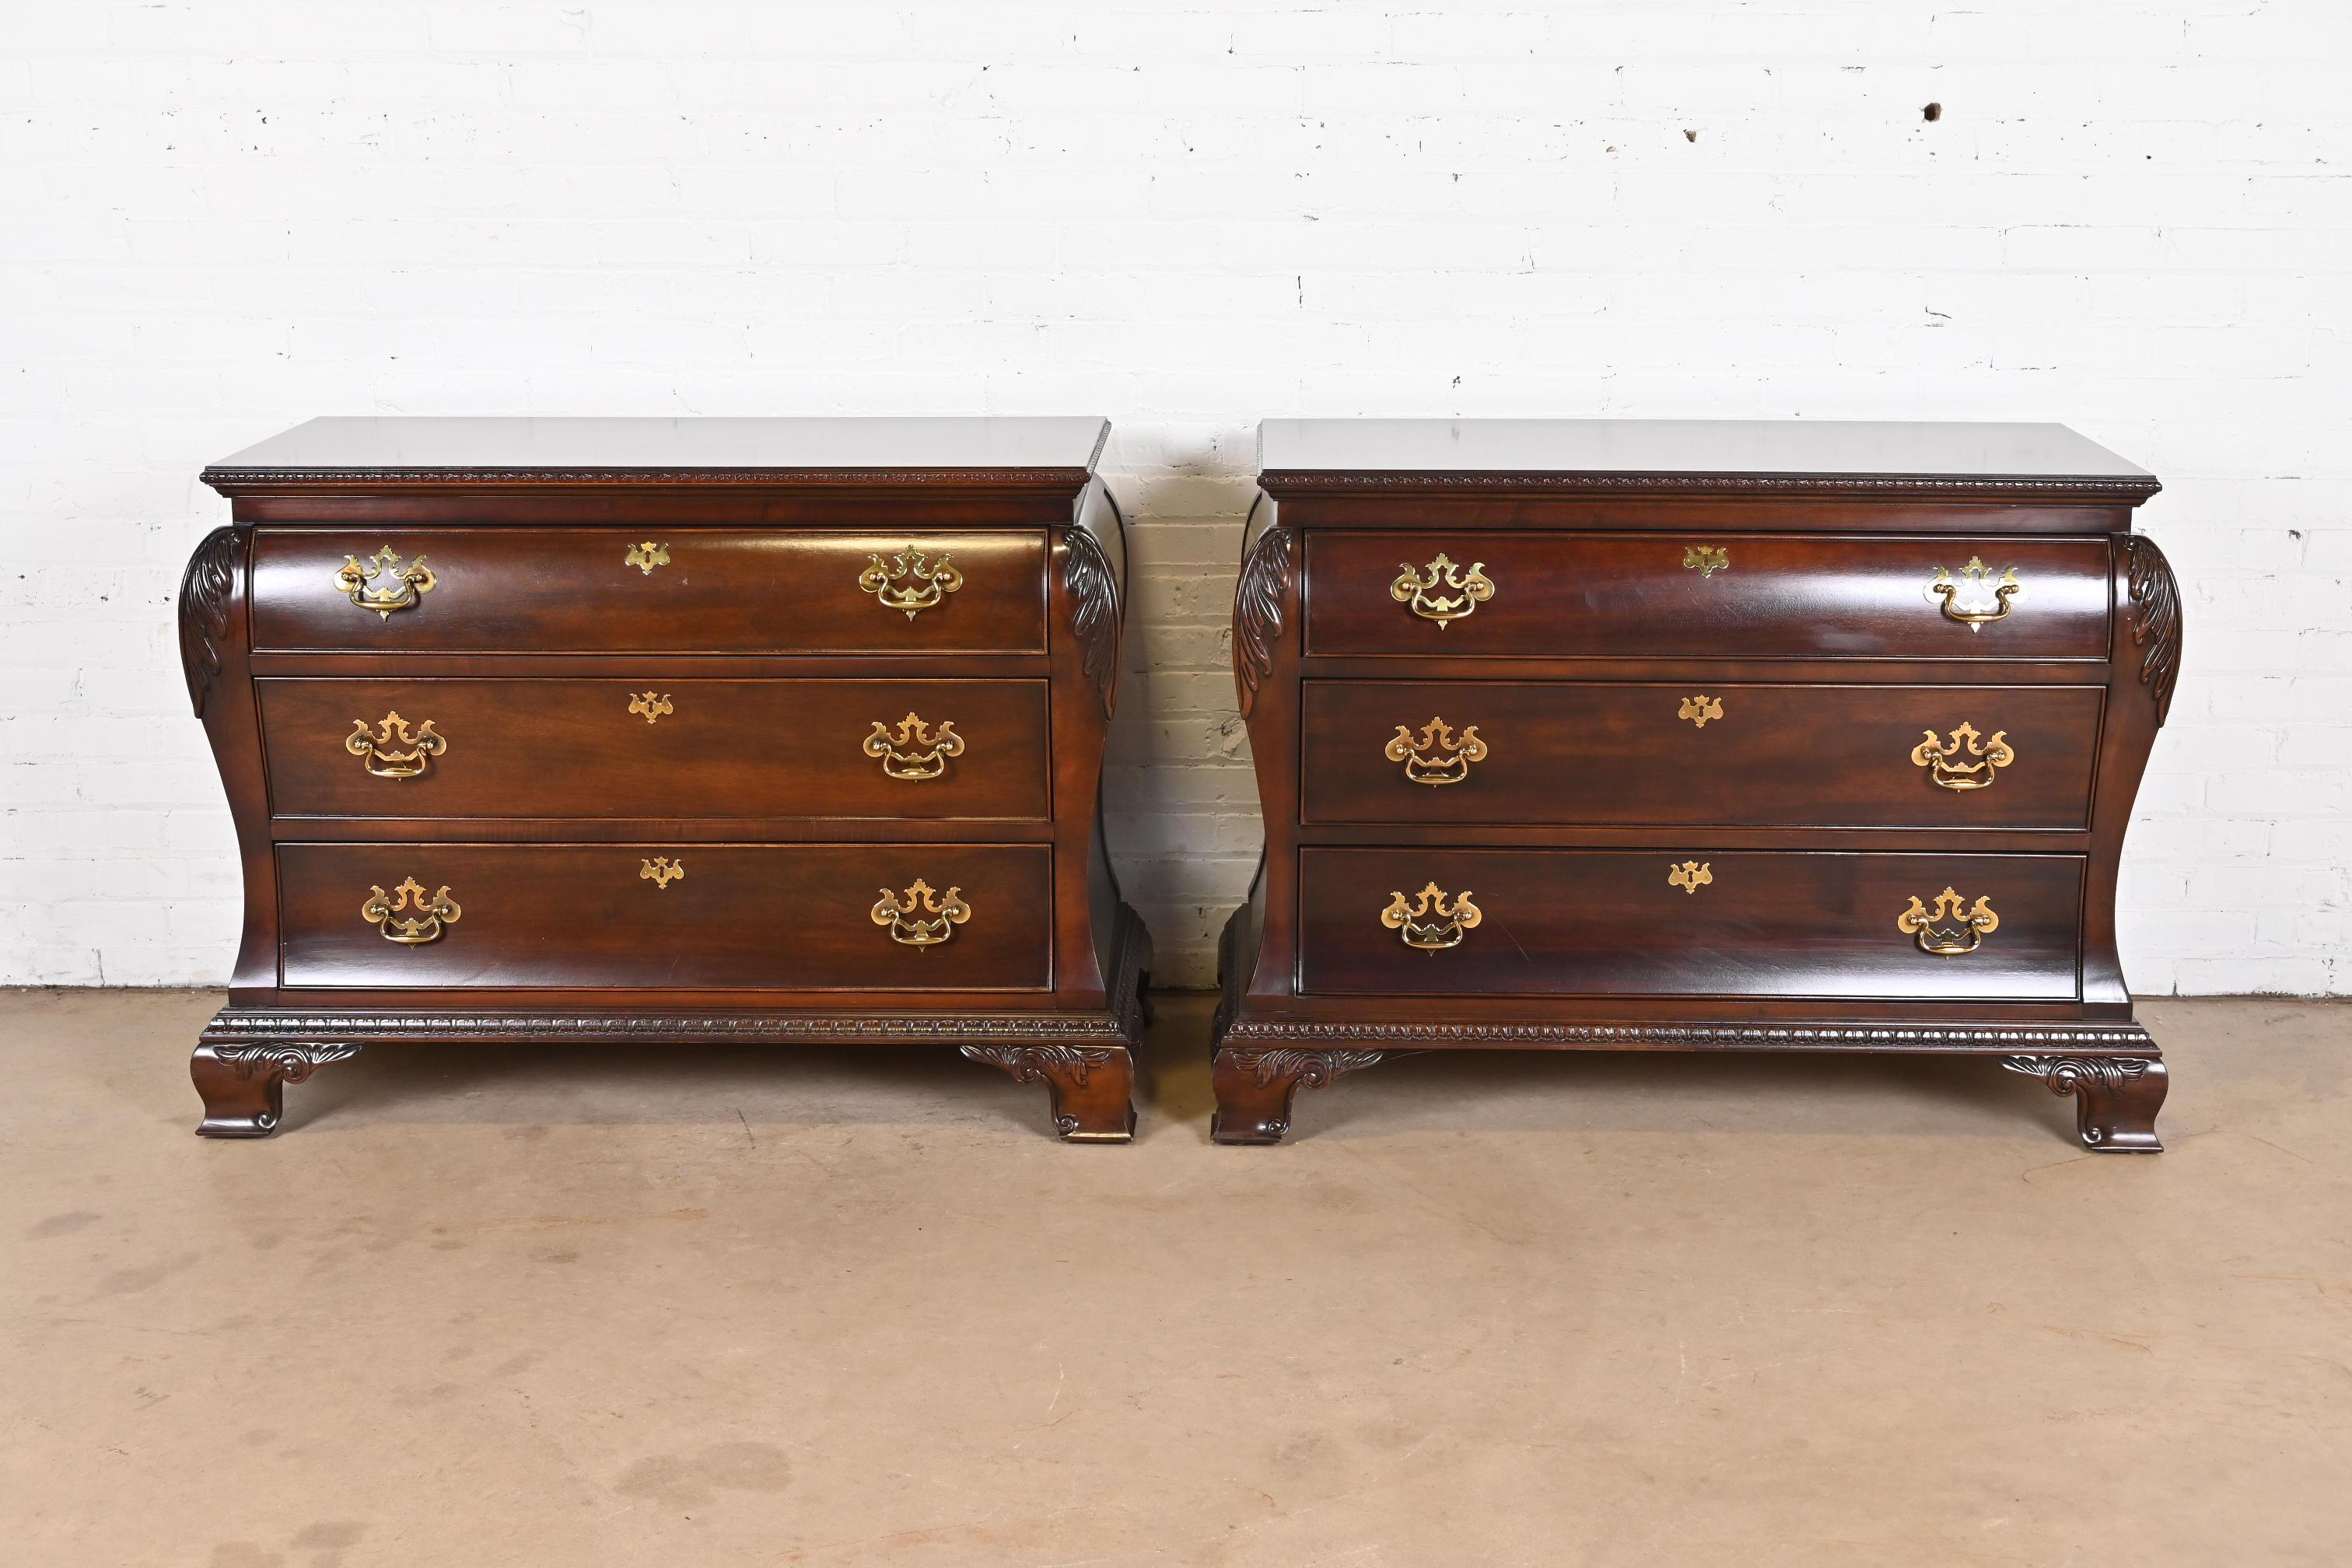 A beautiful pair of Georgian or Chippendale style bombay form dressers, chests of drawers, or commodes

By Century Furniture

USA, Late 20th Century

Carved mahogany, with original brass hardware.

Each measures: 46.25